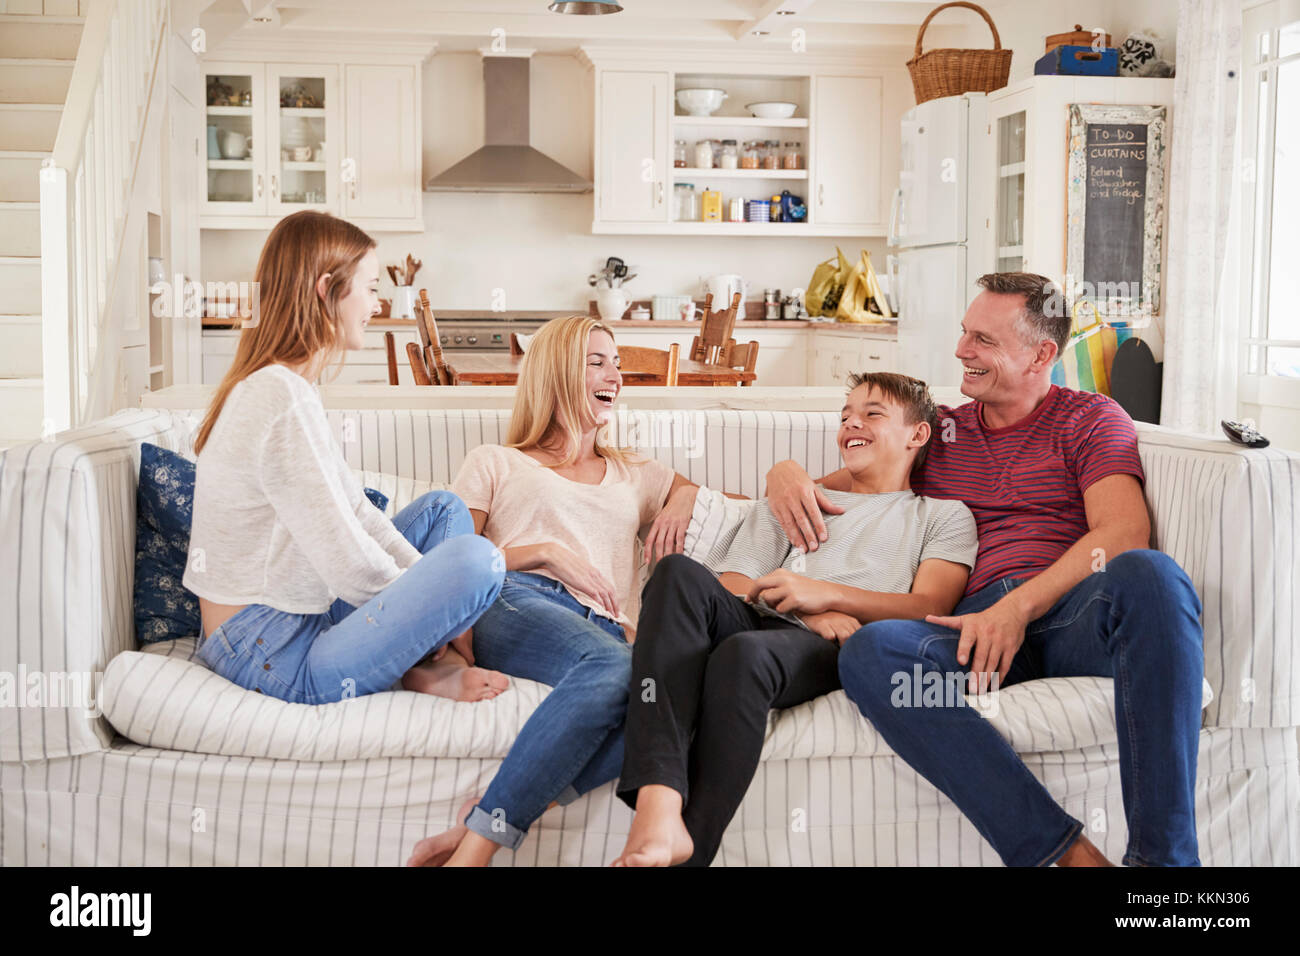 Family With Teenage Children Relaxing On Sofa Together Stock Photo